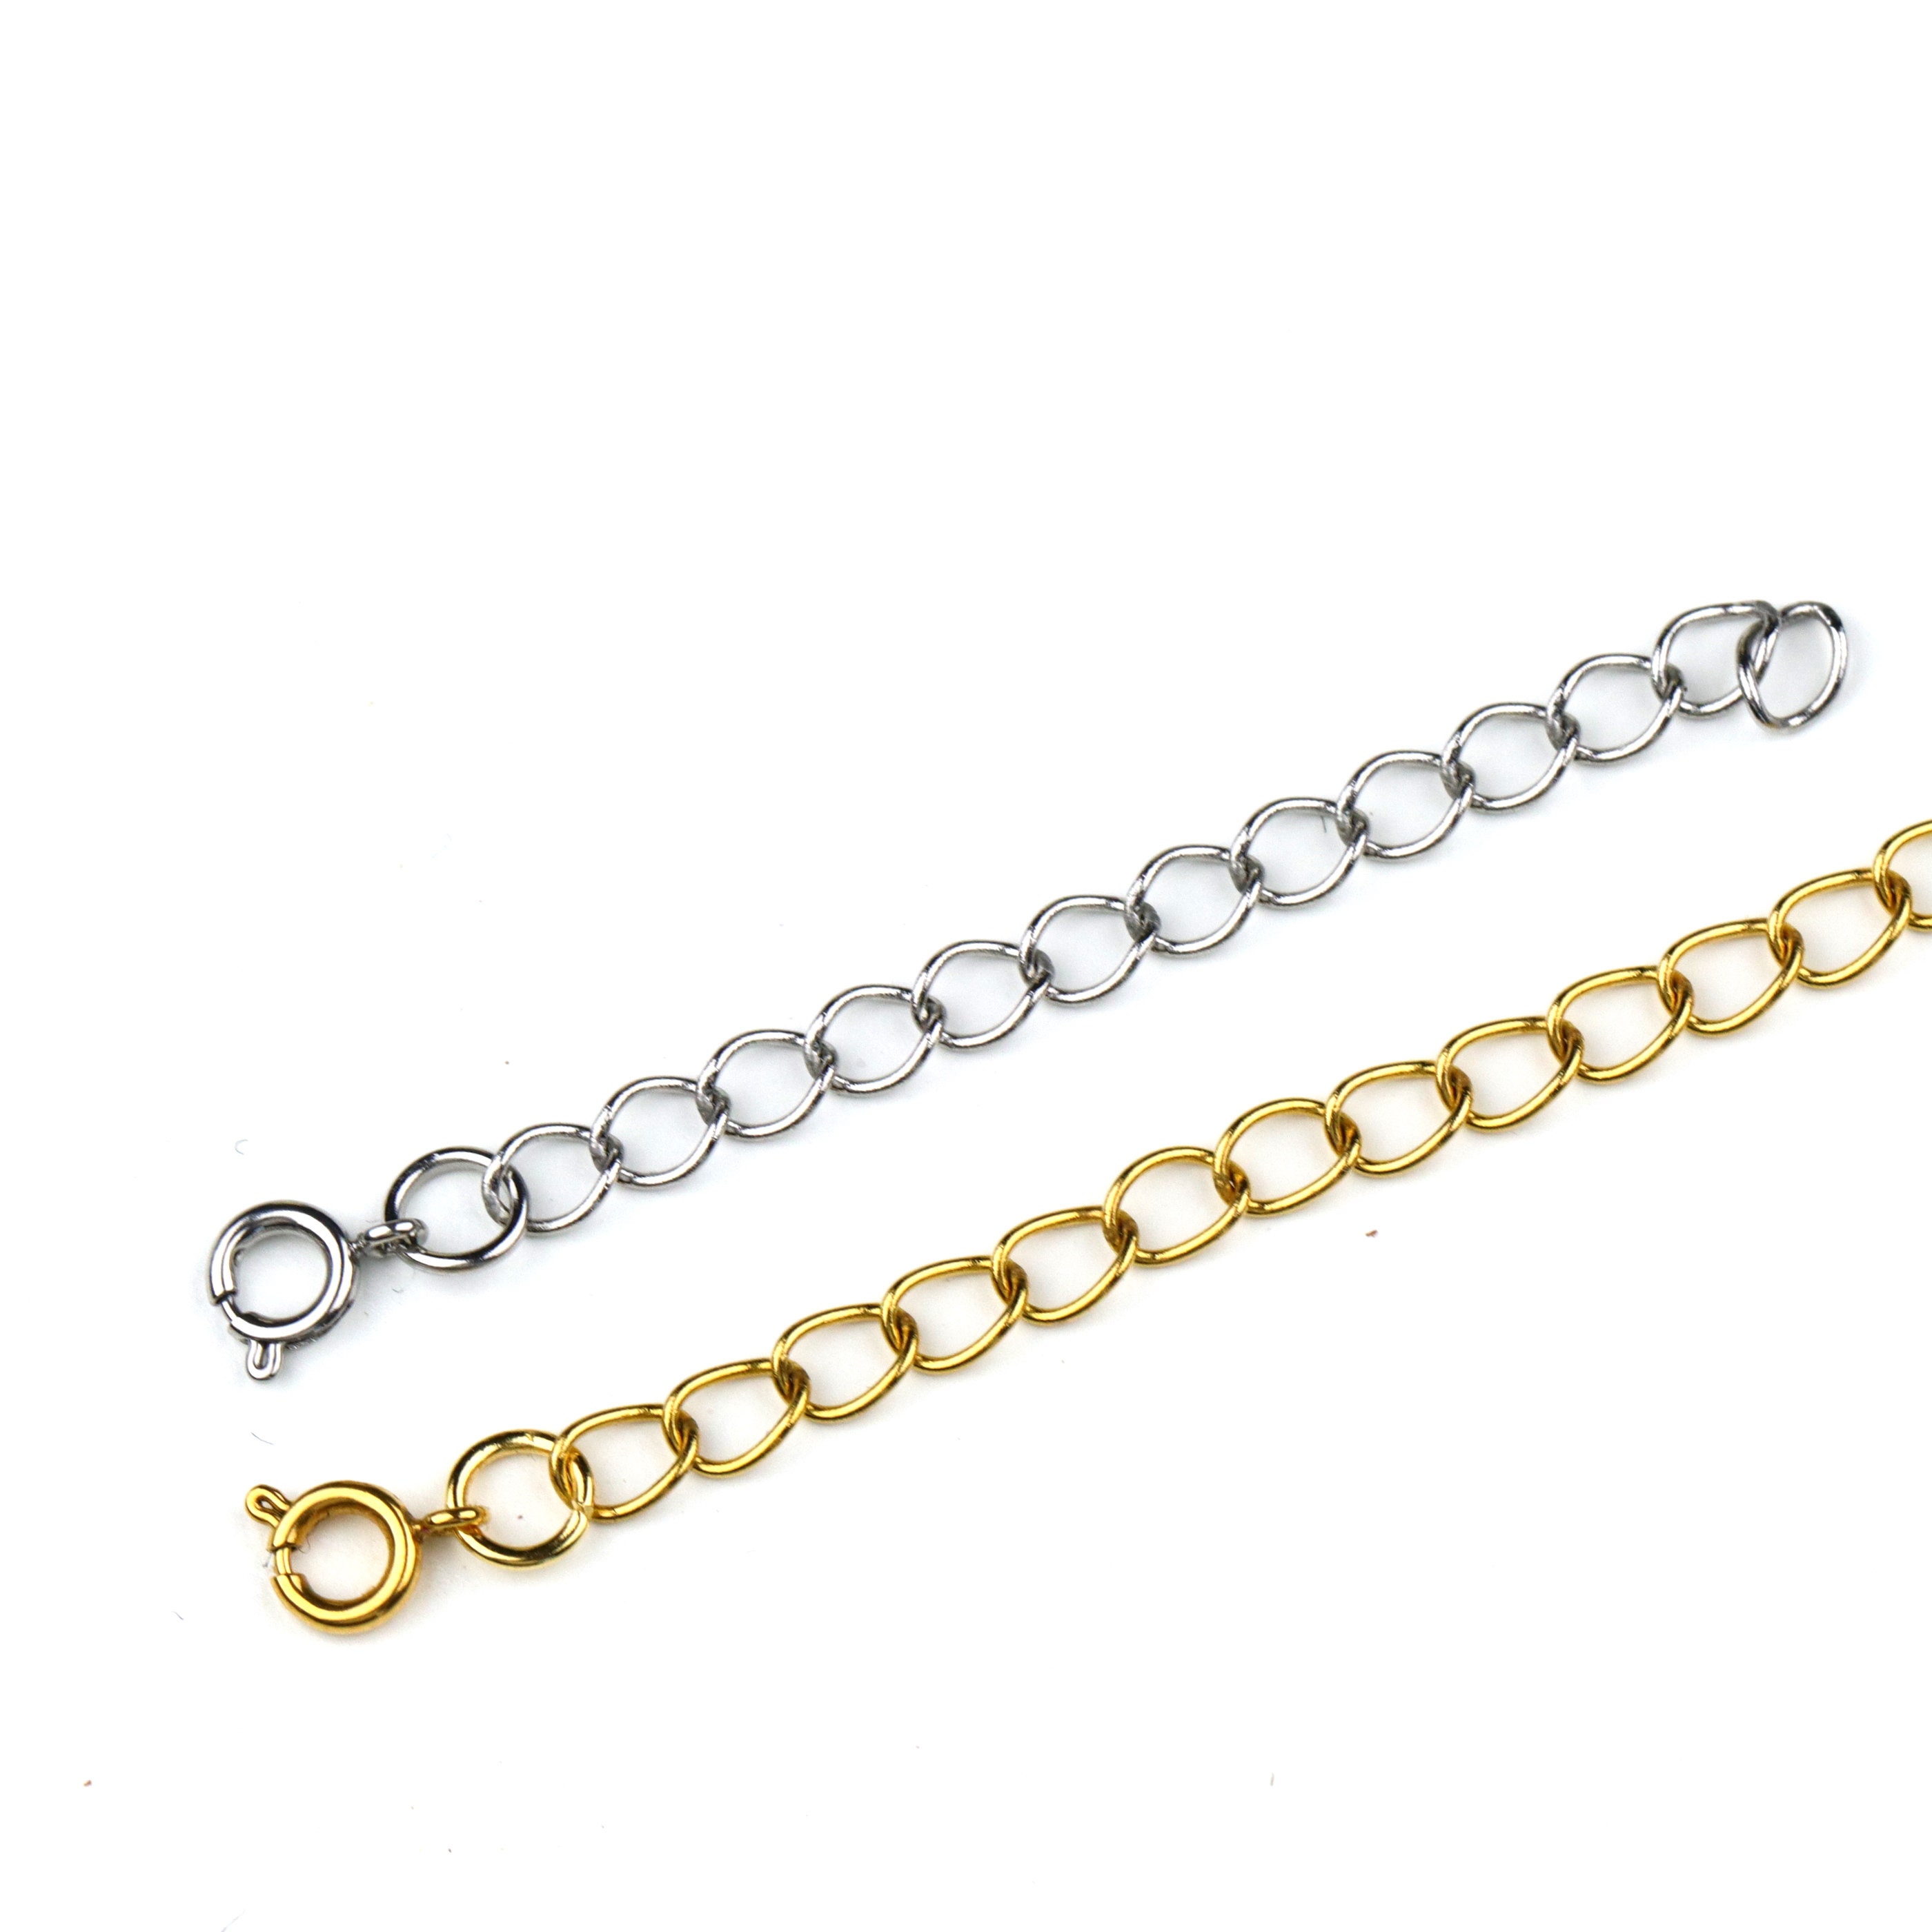 30pcs Chain Extenders Necklaces Jewelry Extenders Stainless Steel Chain Extenders, Adult Unisex, Size: 10x8x1CM, Grey Type